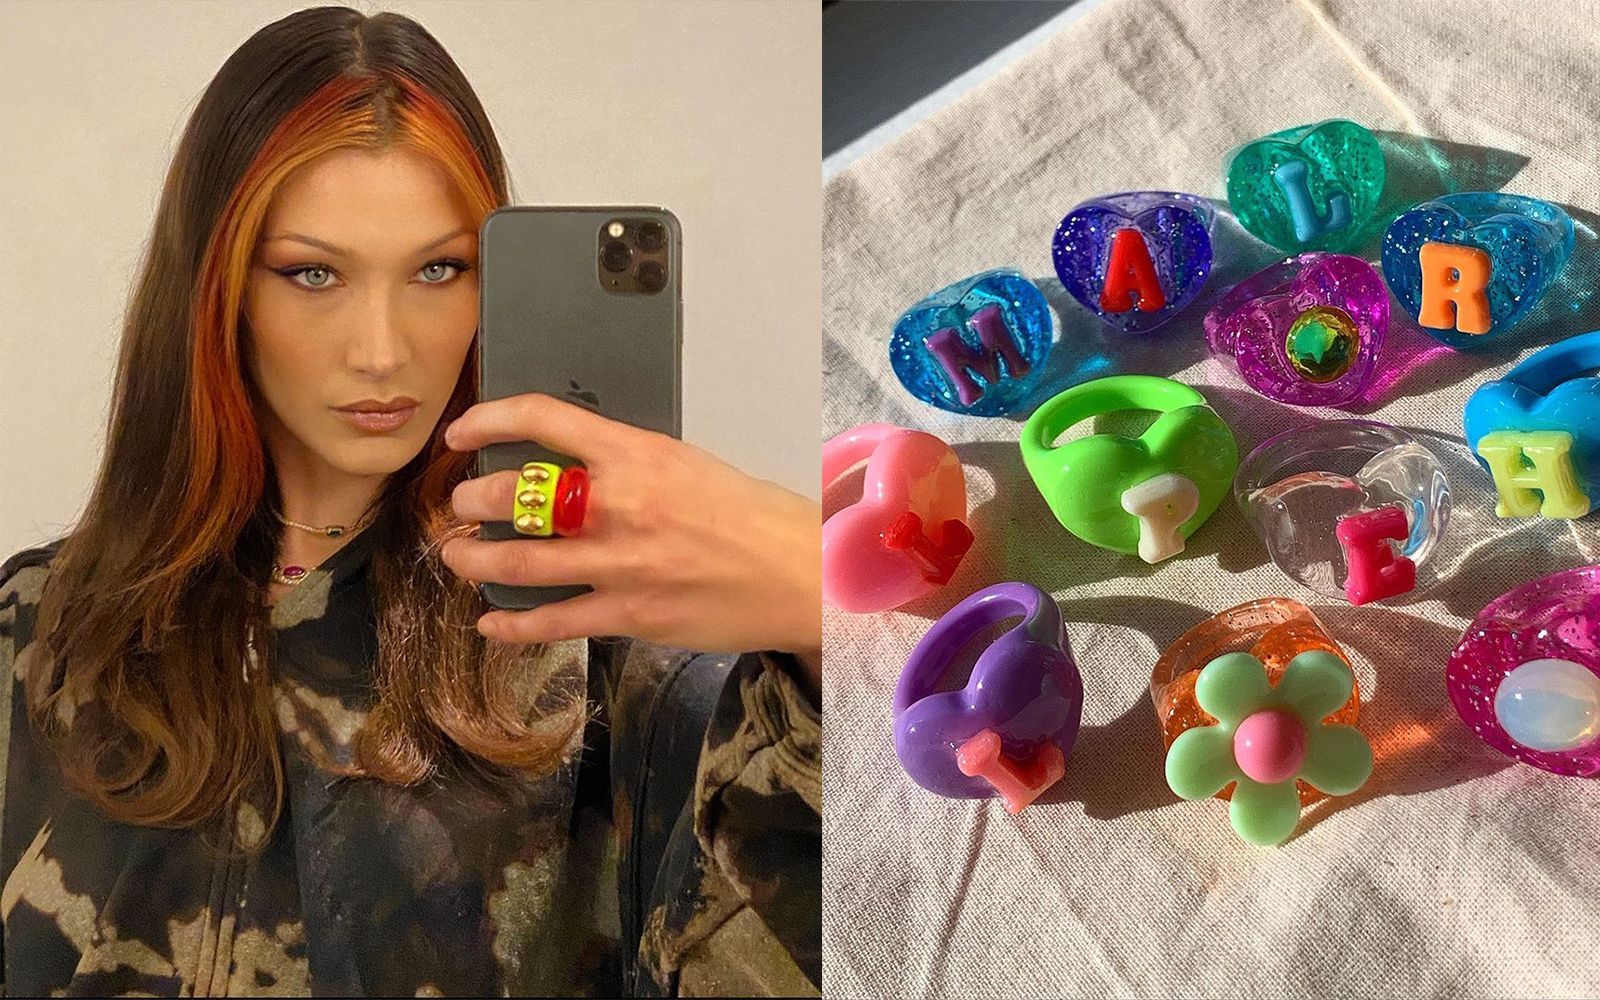 Celebs and Influencers Have Made La Manso Rings an It Item